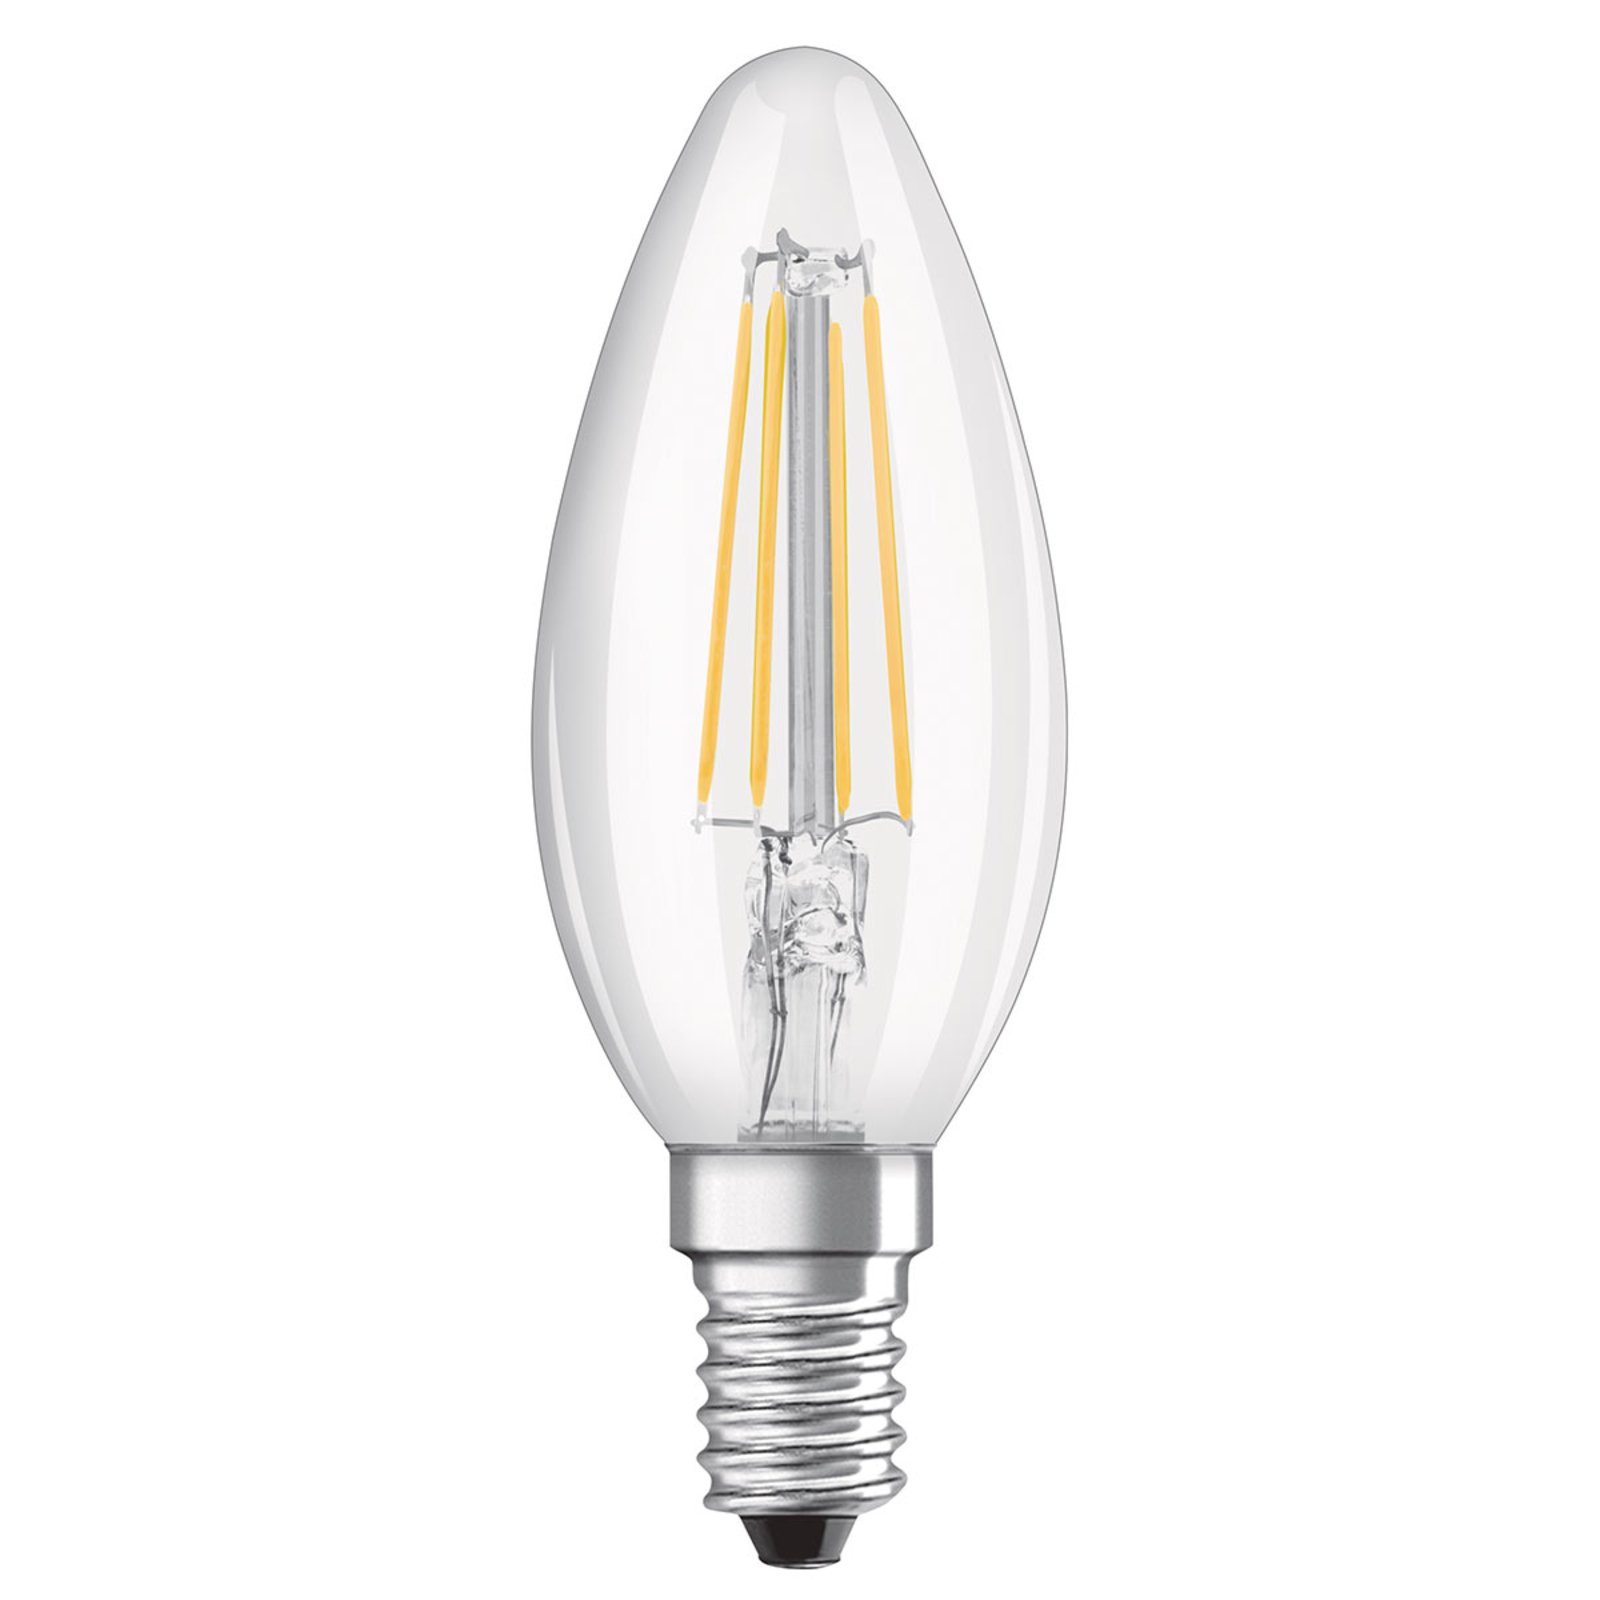 OSRAM LED lamp CLB E14 4W Star+ Relax&Active held.